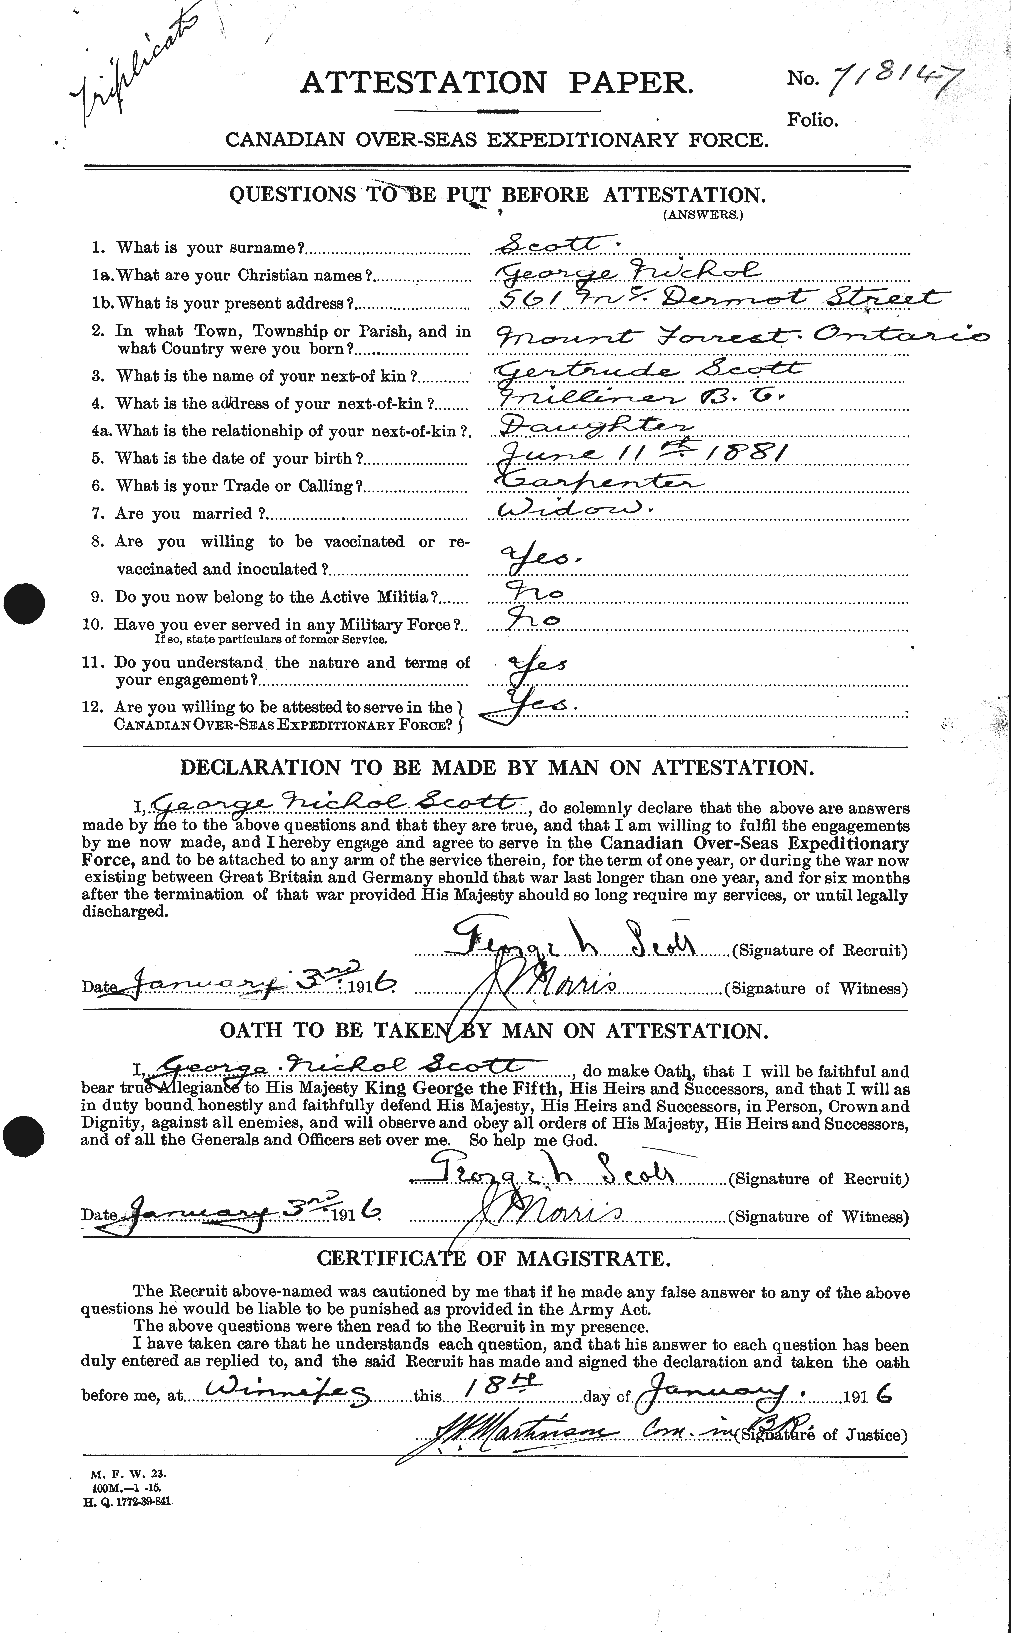 Personnel Records of the First World War - CEF 083540a